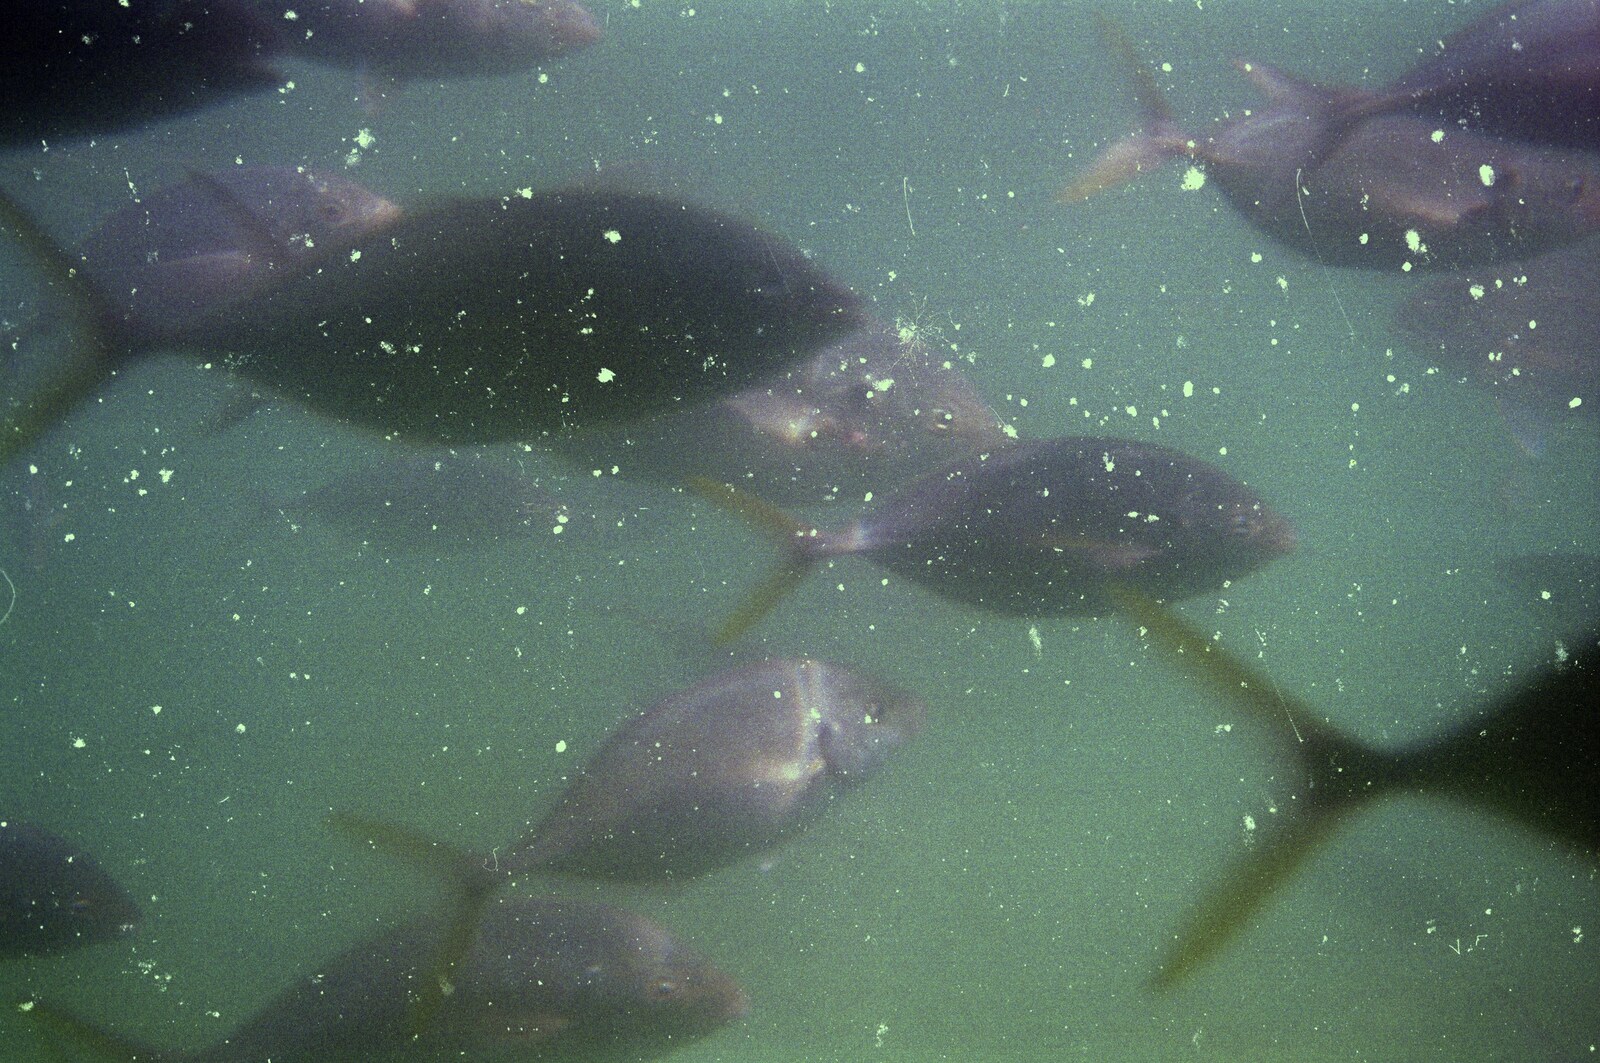 Fish seen through a glass-bottomed boat from The Bay Of Islands, New Zealand - 29th November 1992